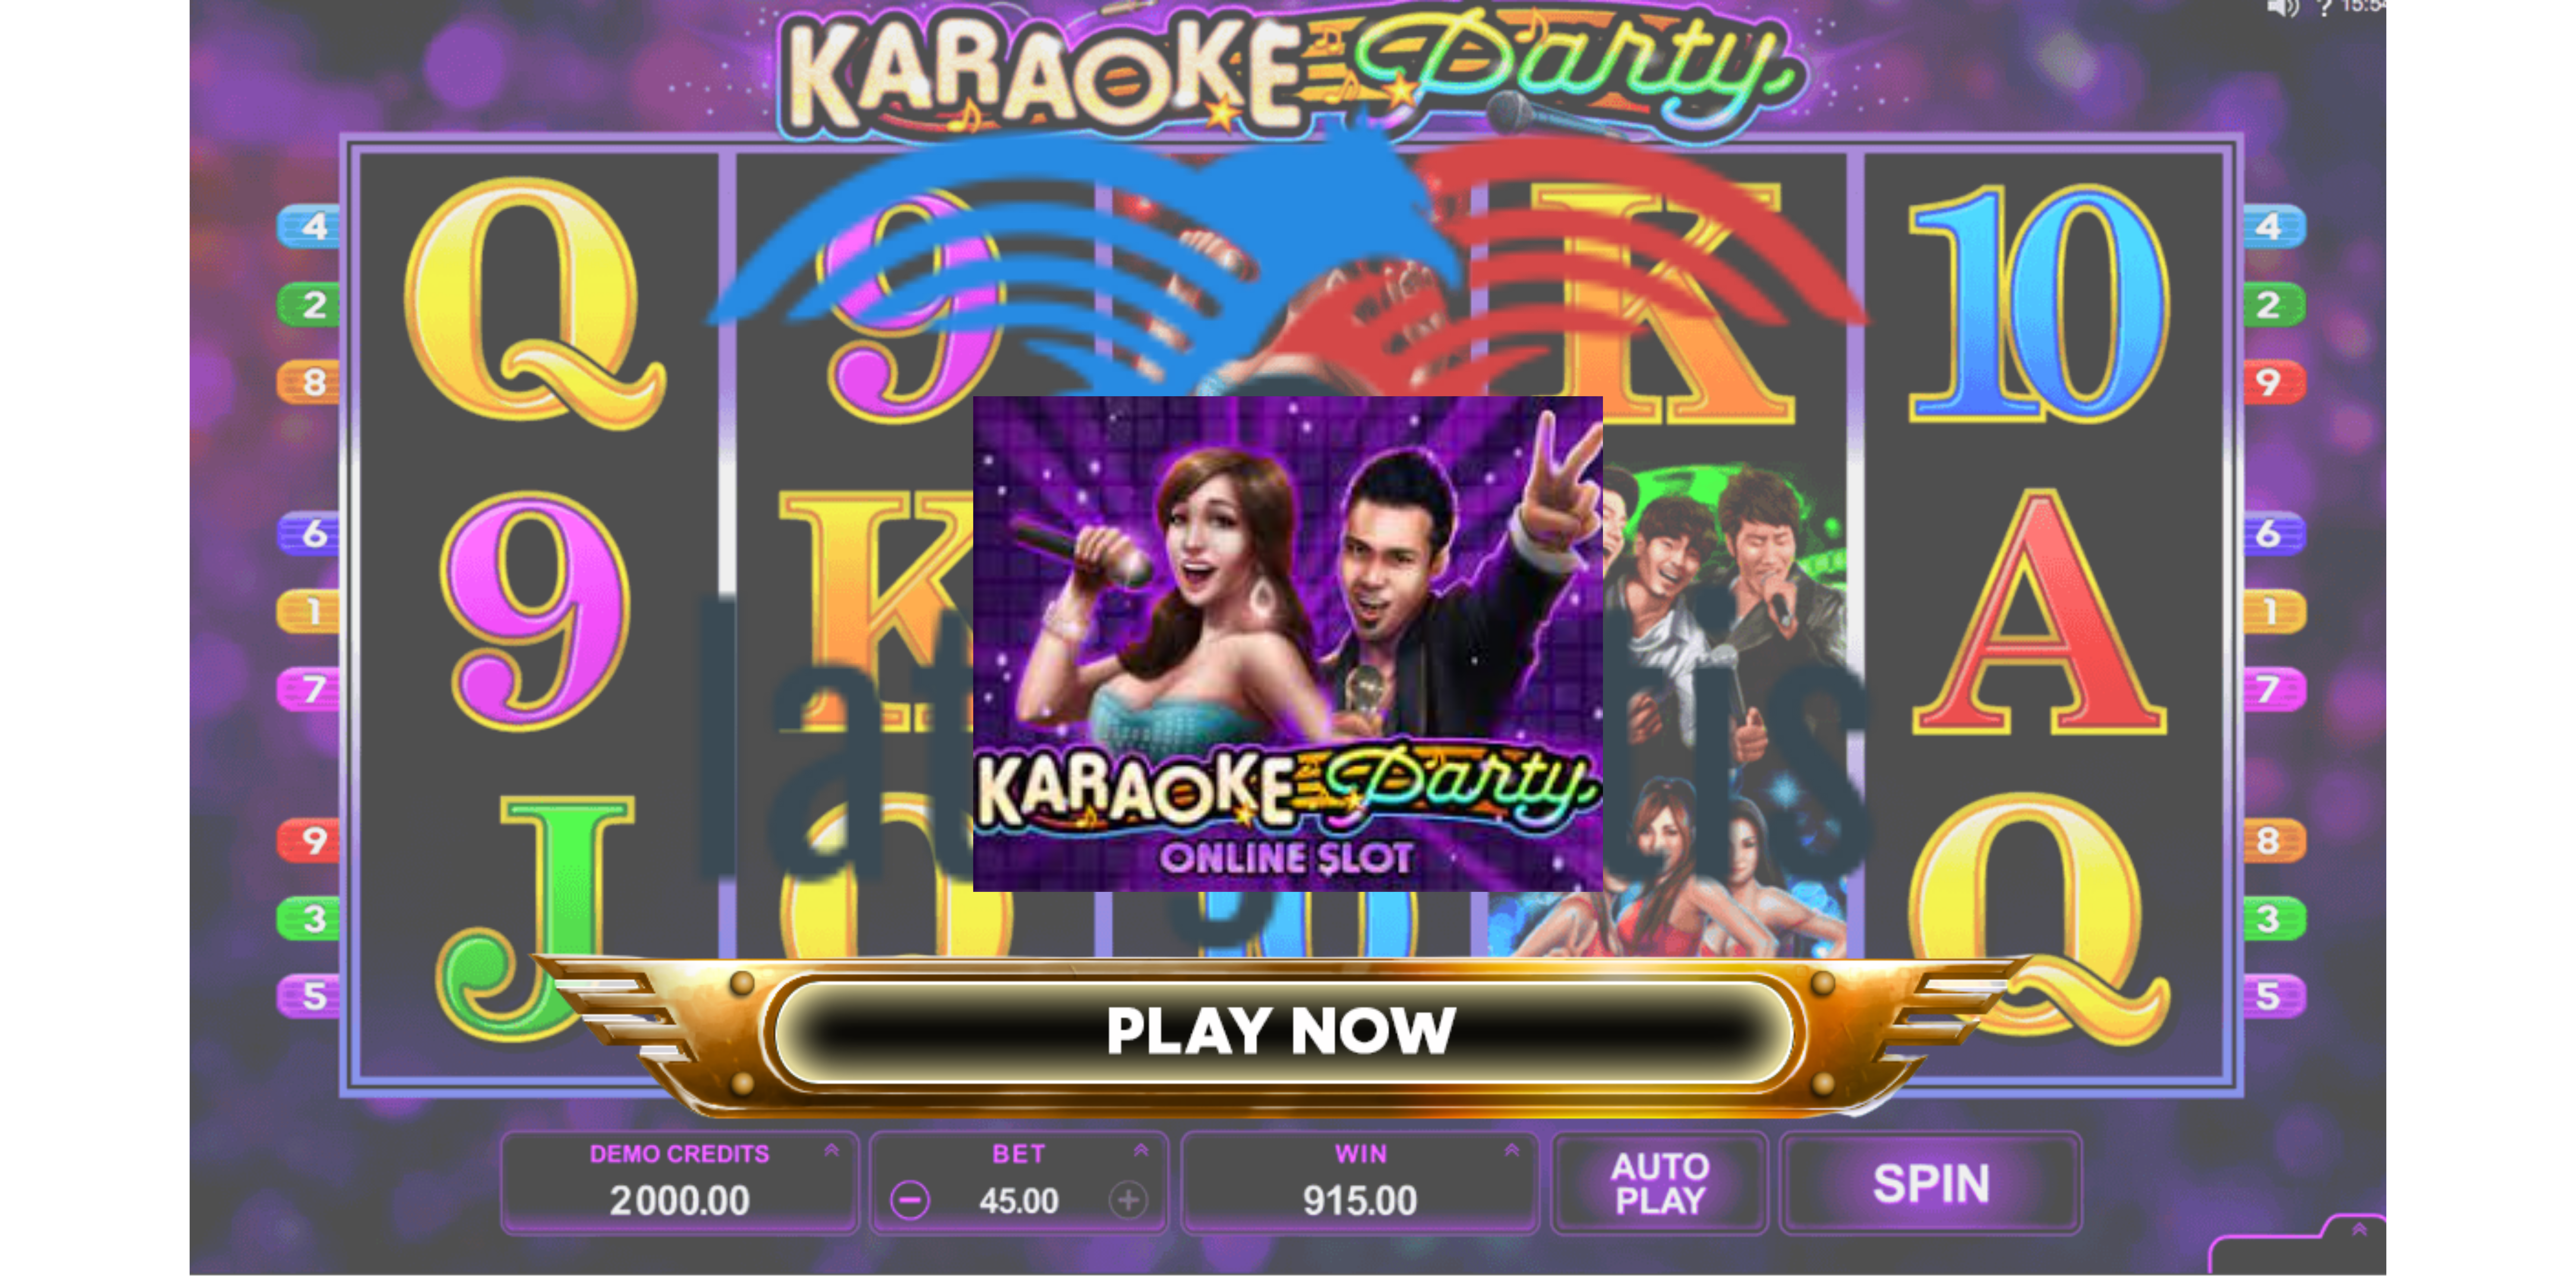 Karaoke Party Slot Online Microgaming Review